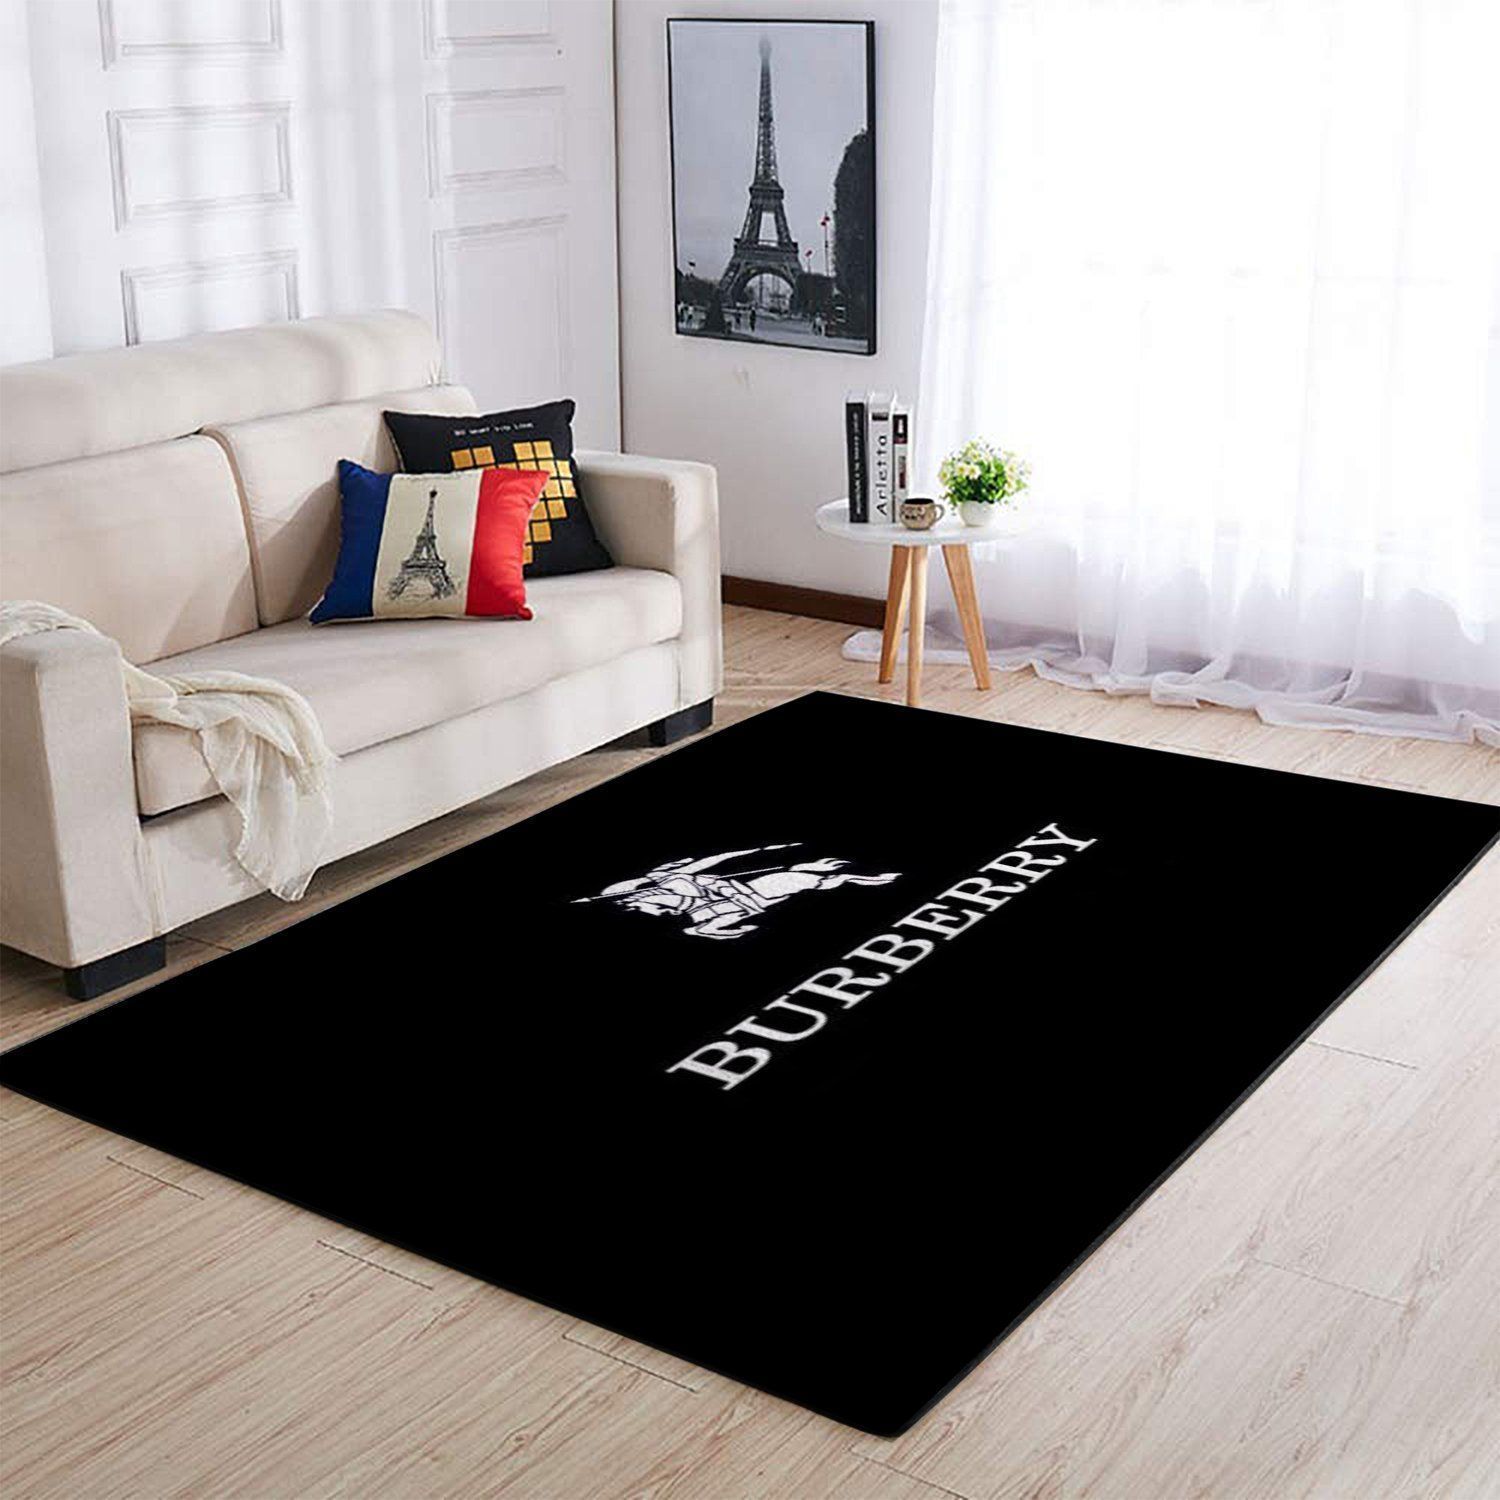 Burberry Luxury Brand 25 Area Rug Living Room And Bedroom Rug Us Gift Decor VH3